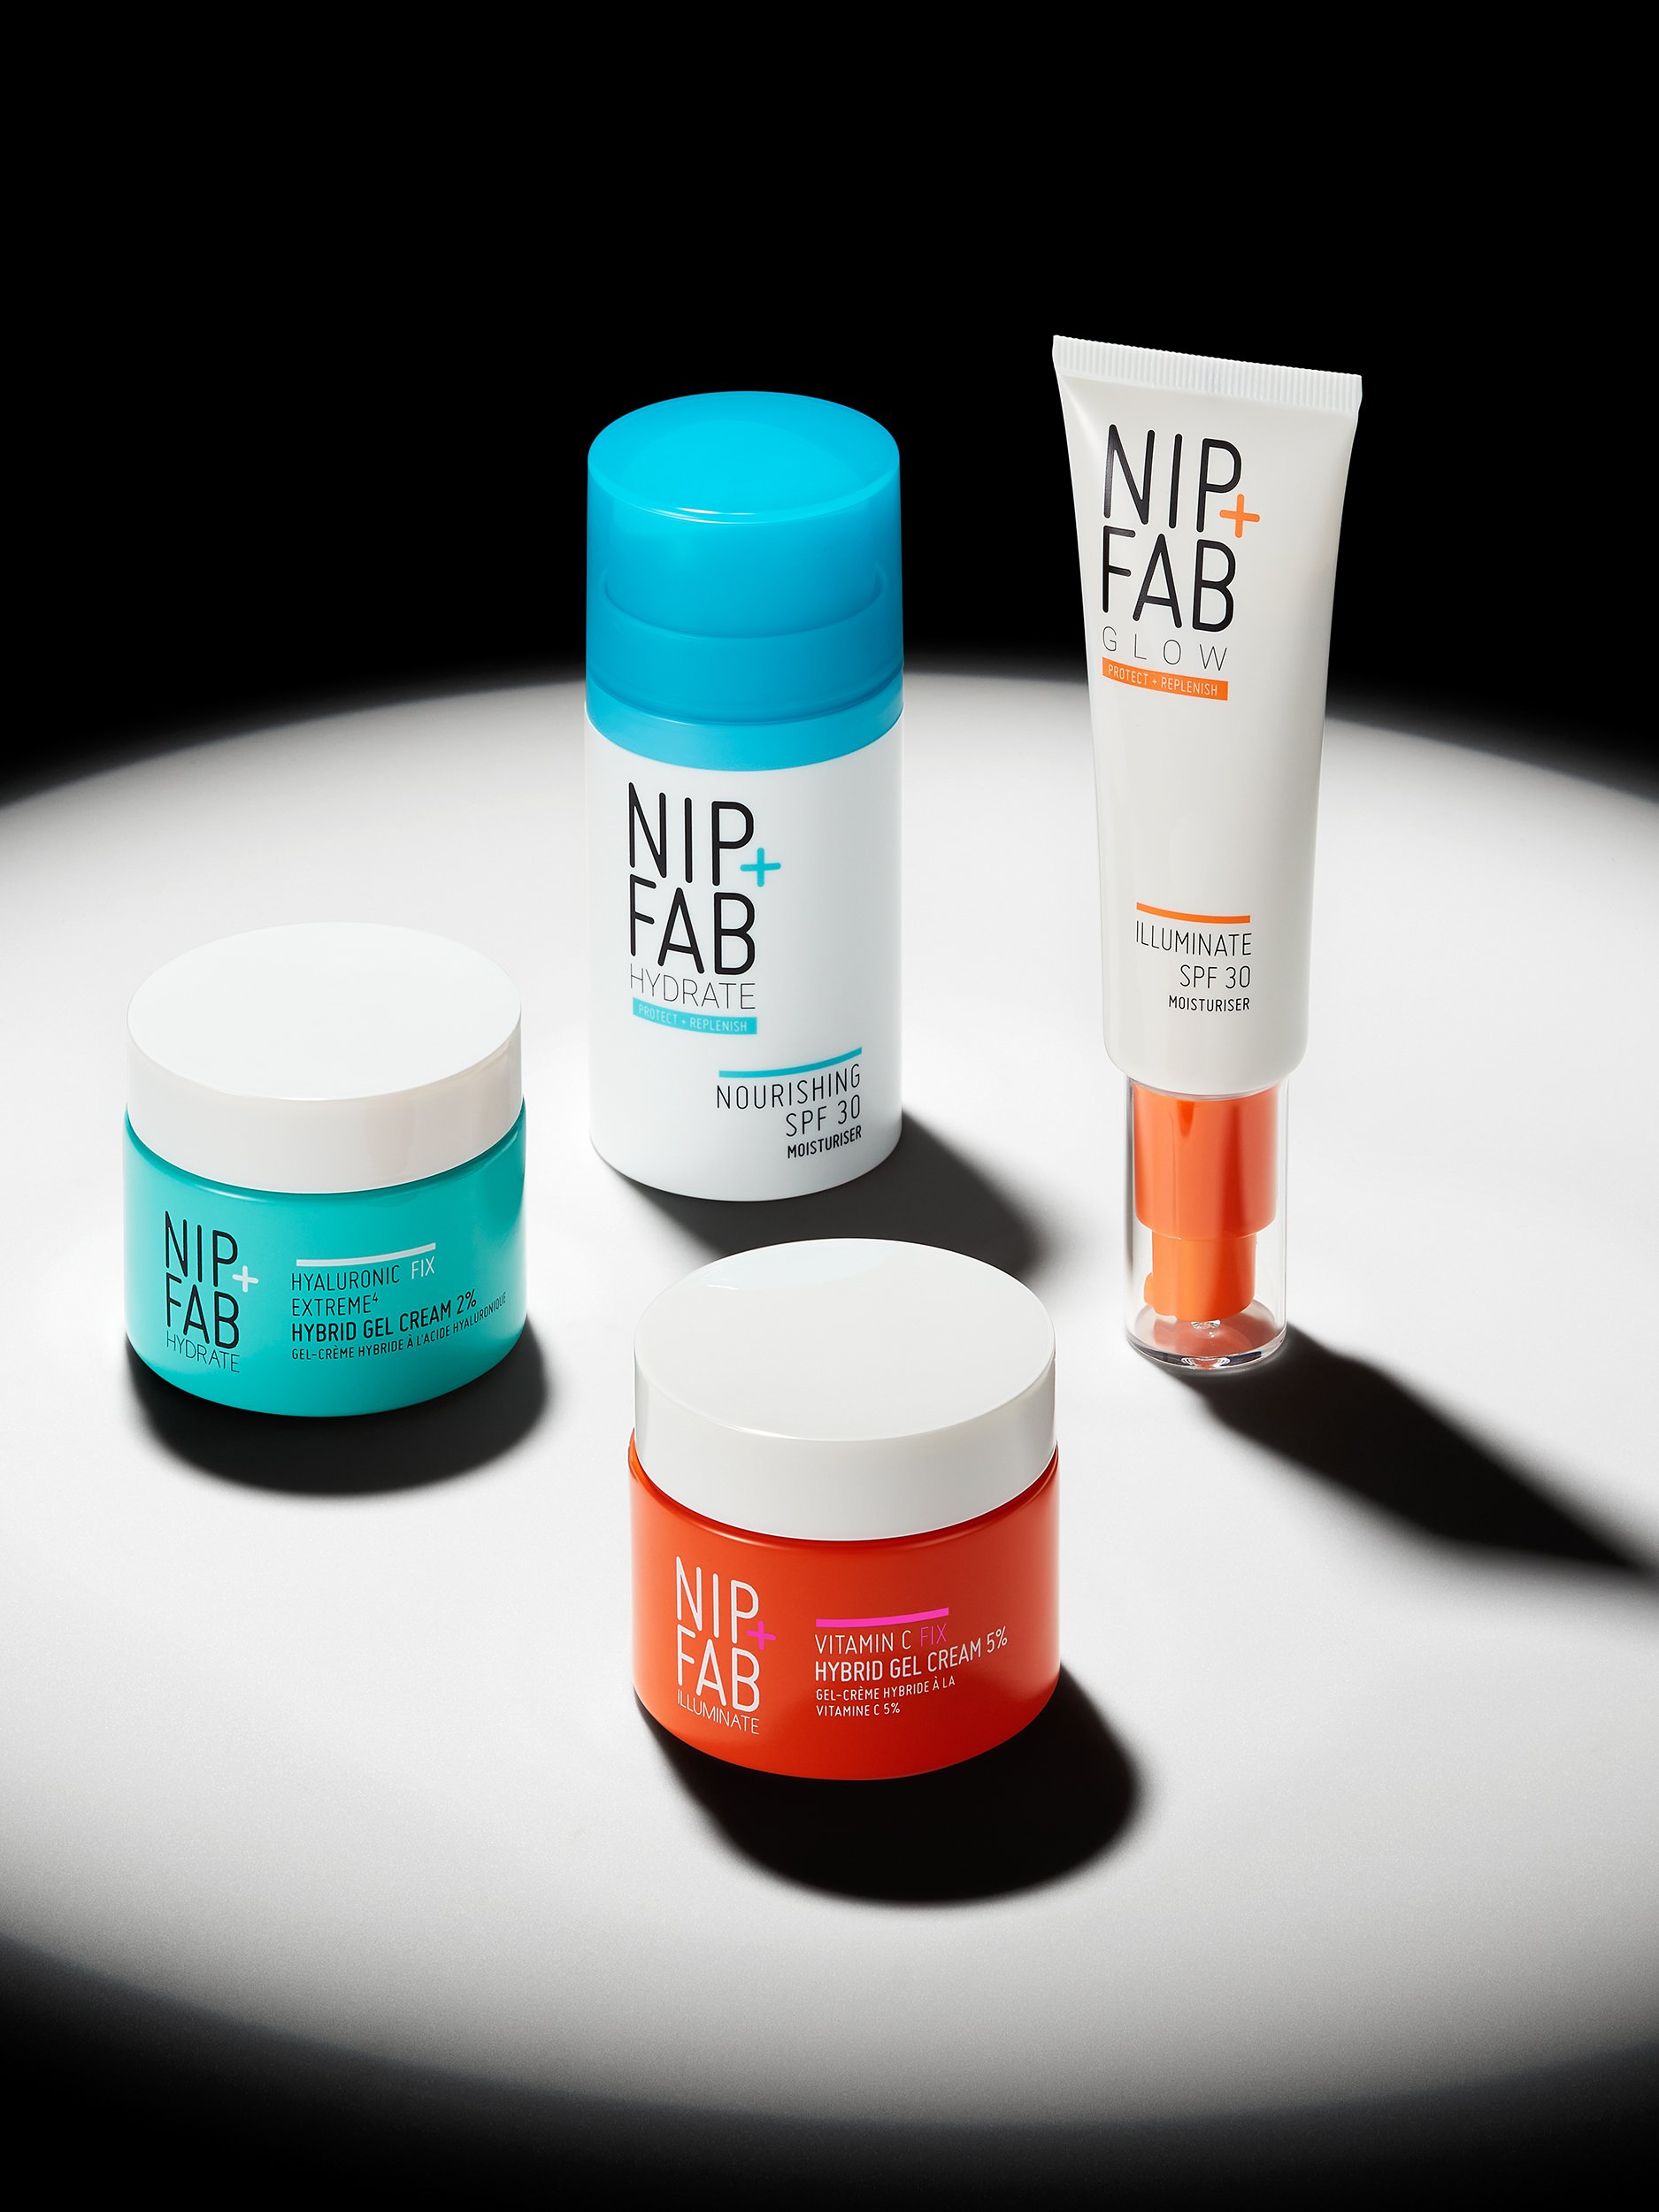 Nip + Fab hydrate and glow range - photography by Simon Lyle Ritchie